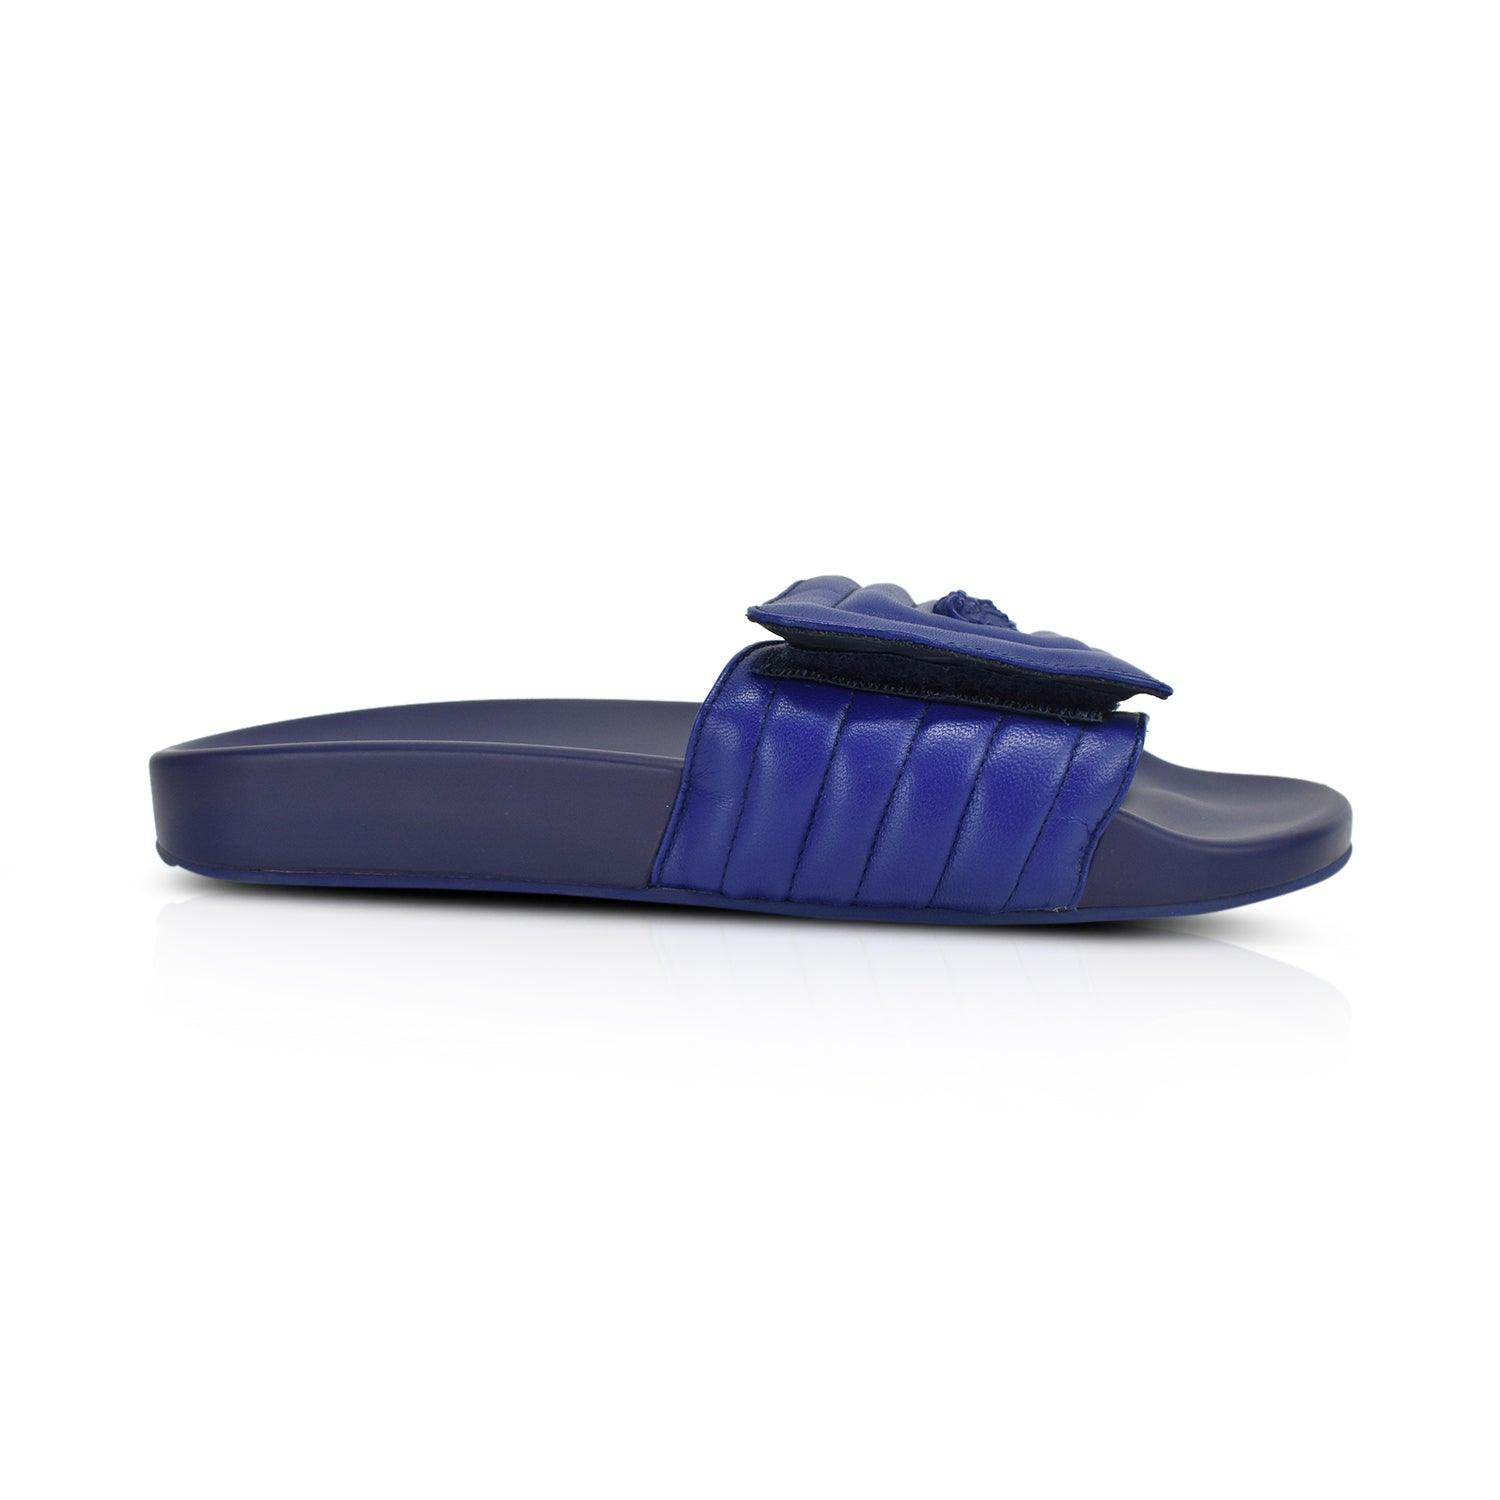 Versace Pool Slide - Women's 38 - Fashionably Yours